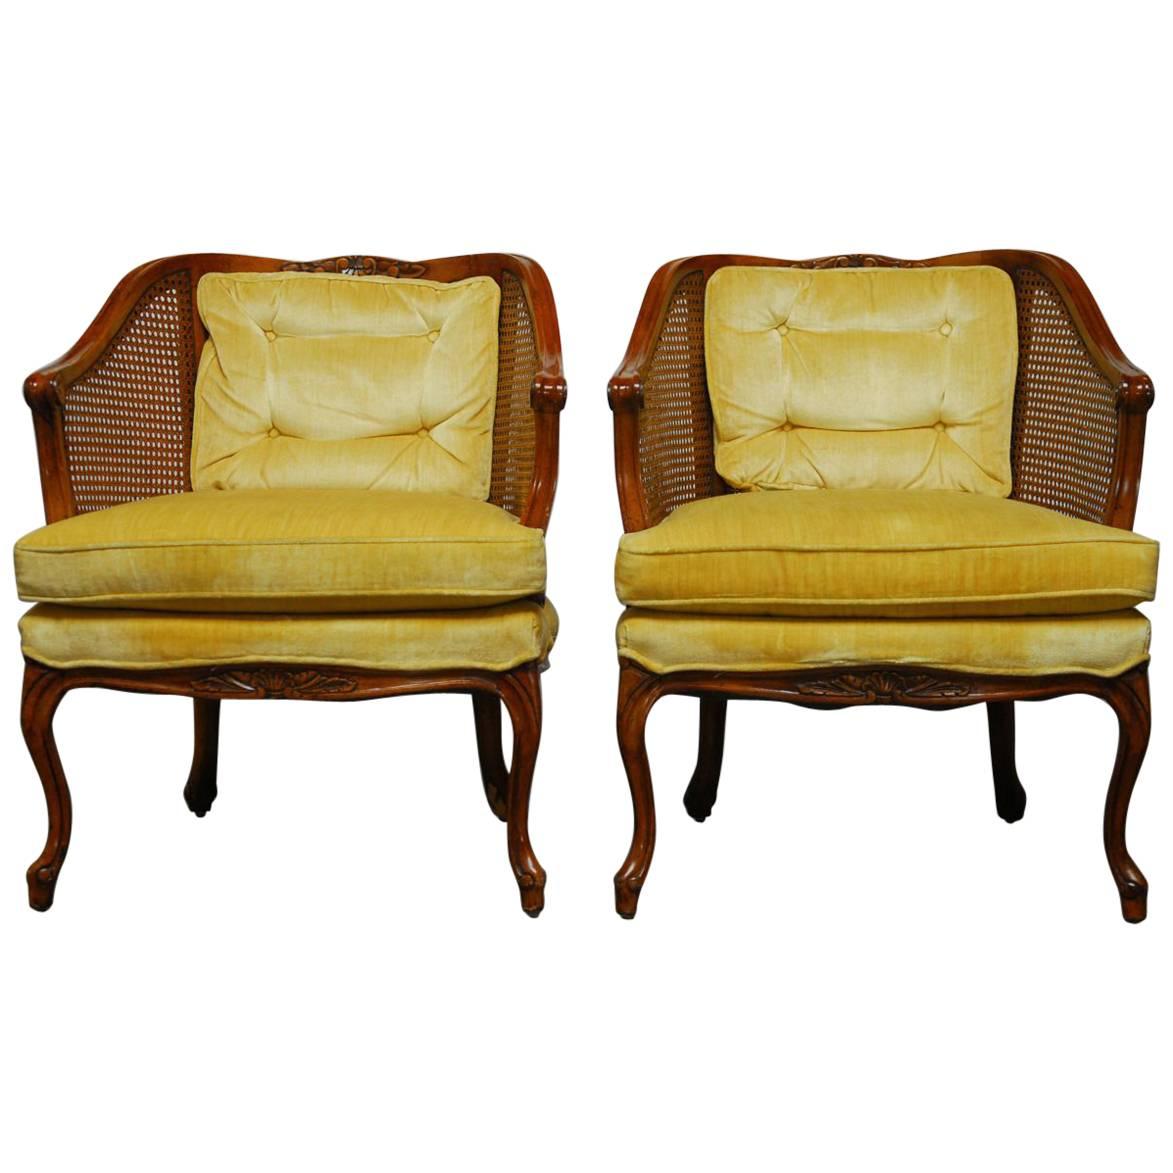 Pair of Mid-Century Cane Barrel Back Armchairs